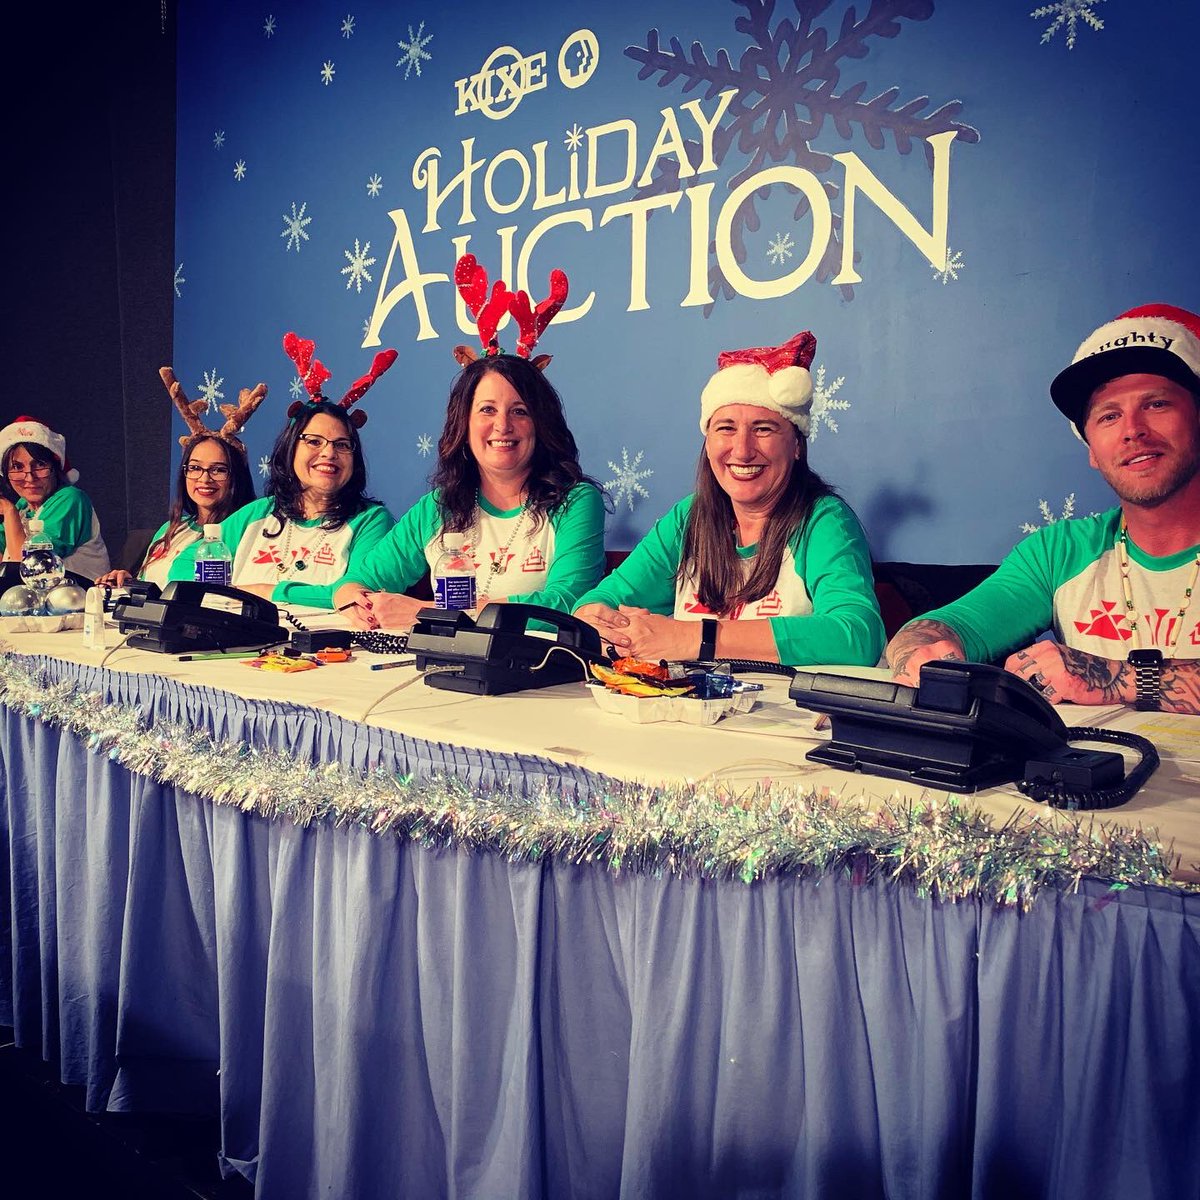 Team #ReddingRancheria answering phones for the KIXE  Holiday Auction! #proudtoplayourpart